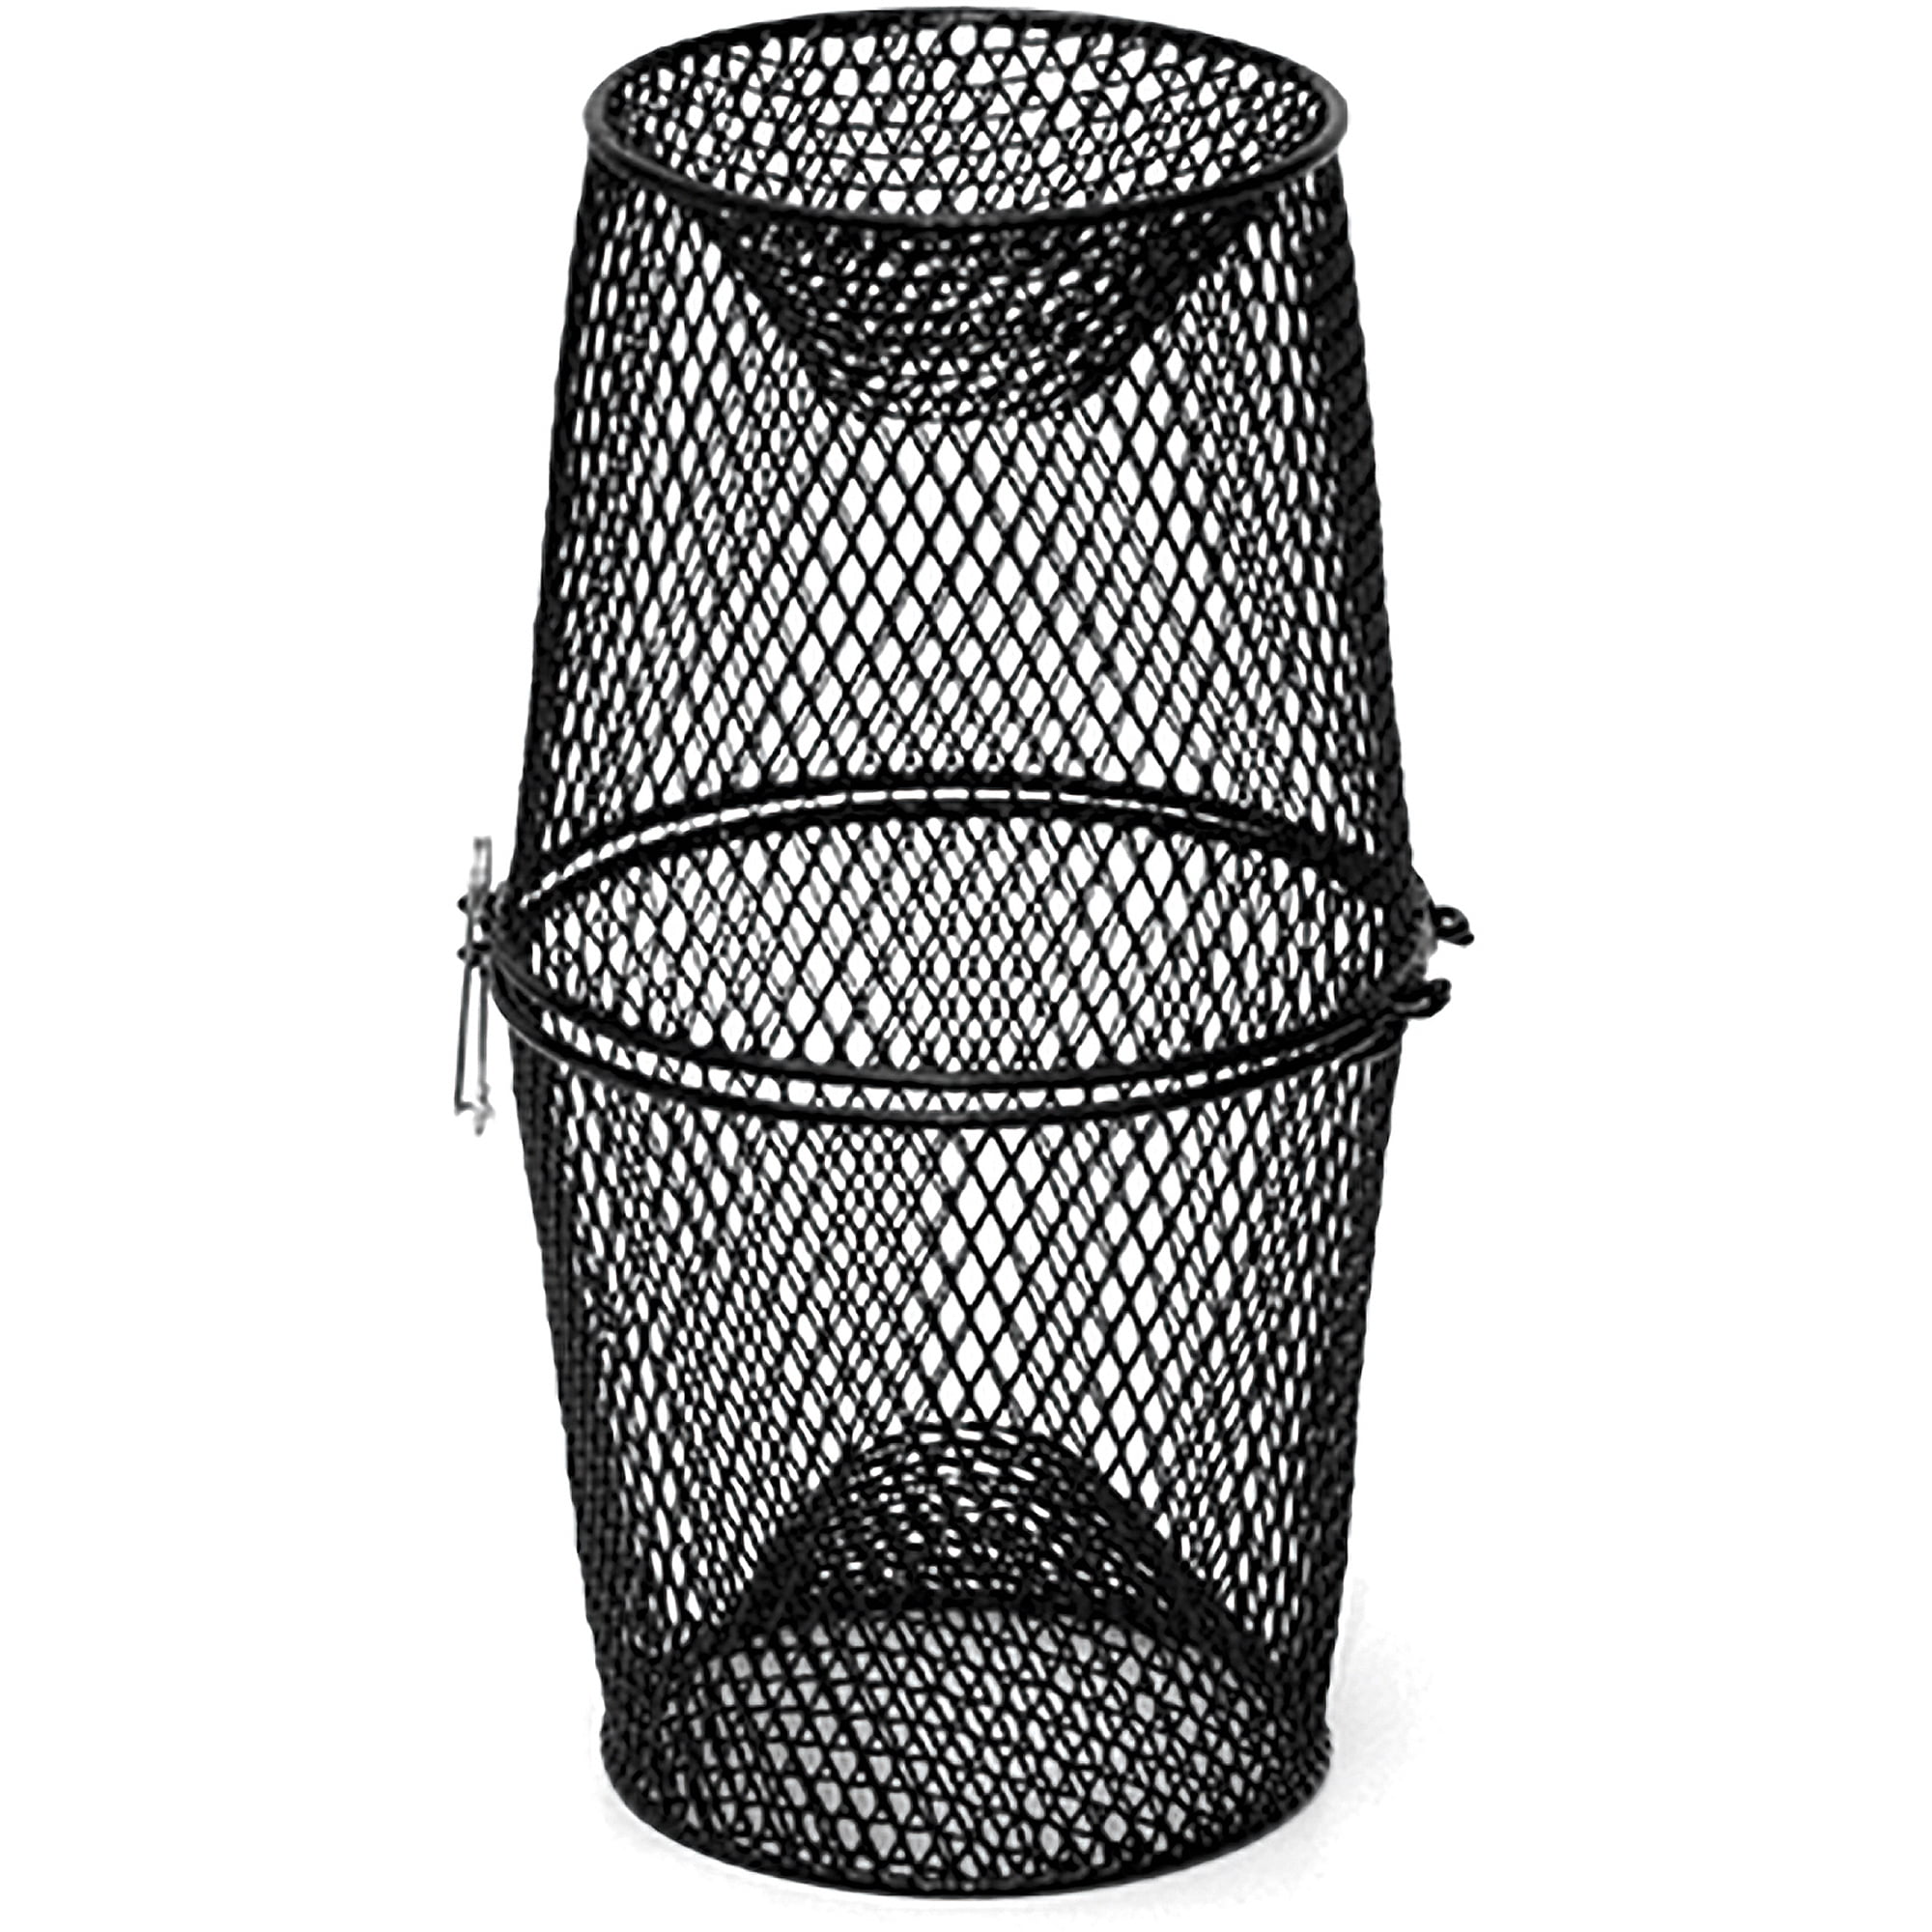 Wire Mesh Minnow Trap Bait Fish Quality Galvanized Steel Durable Collapsible NEW 